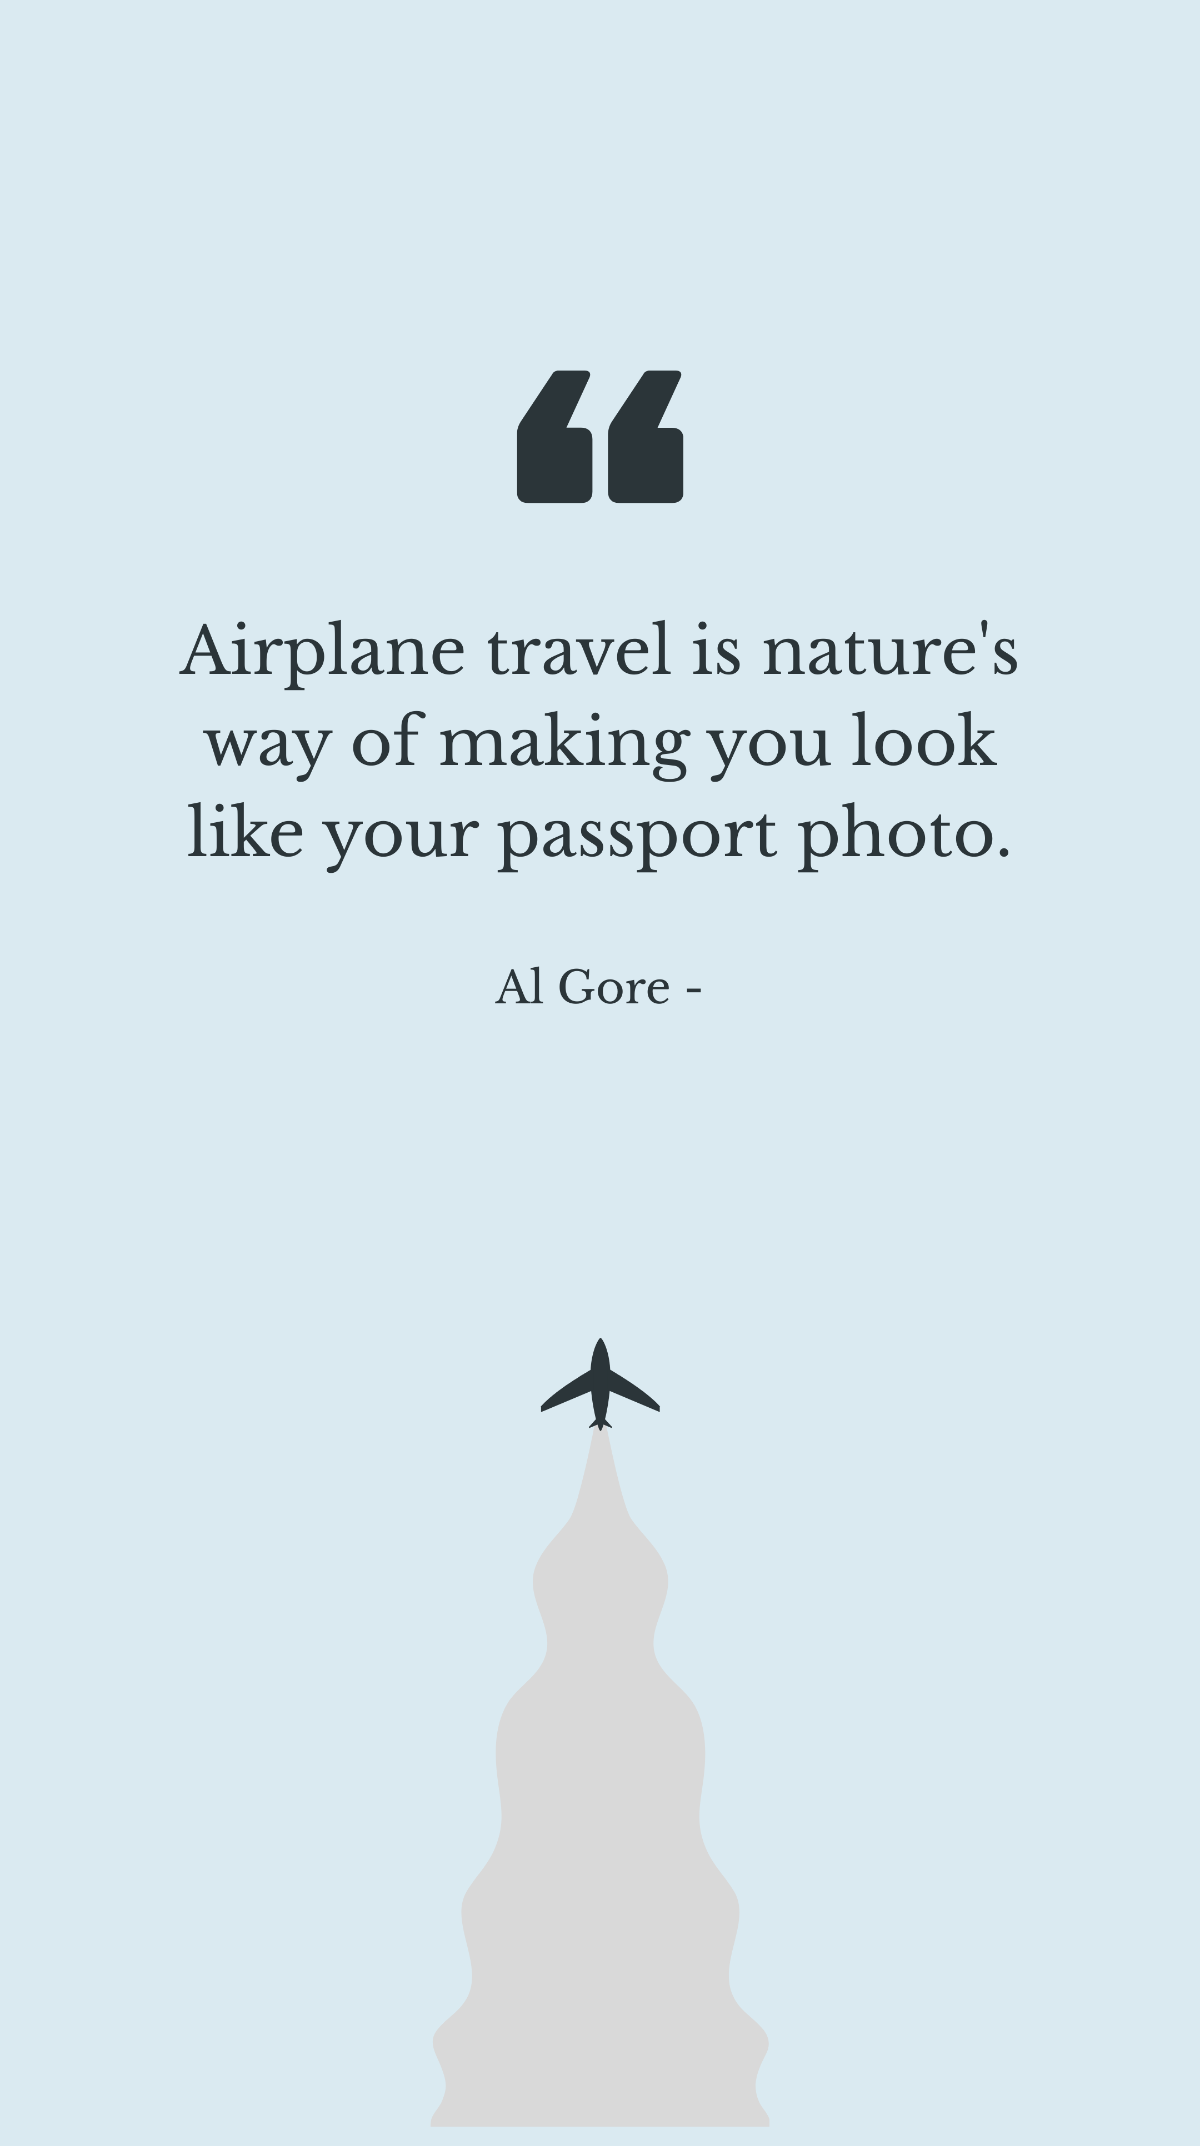 Free Al Gore - Airplane travel is nature's way of making you look like your passport photo. Template